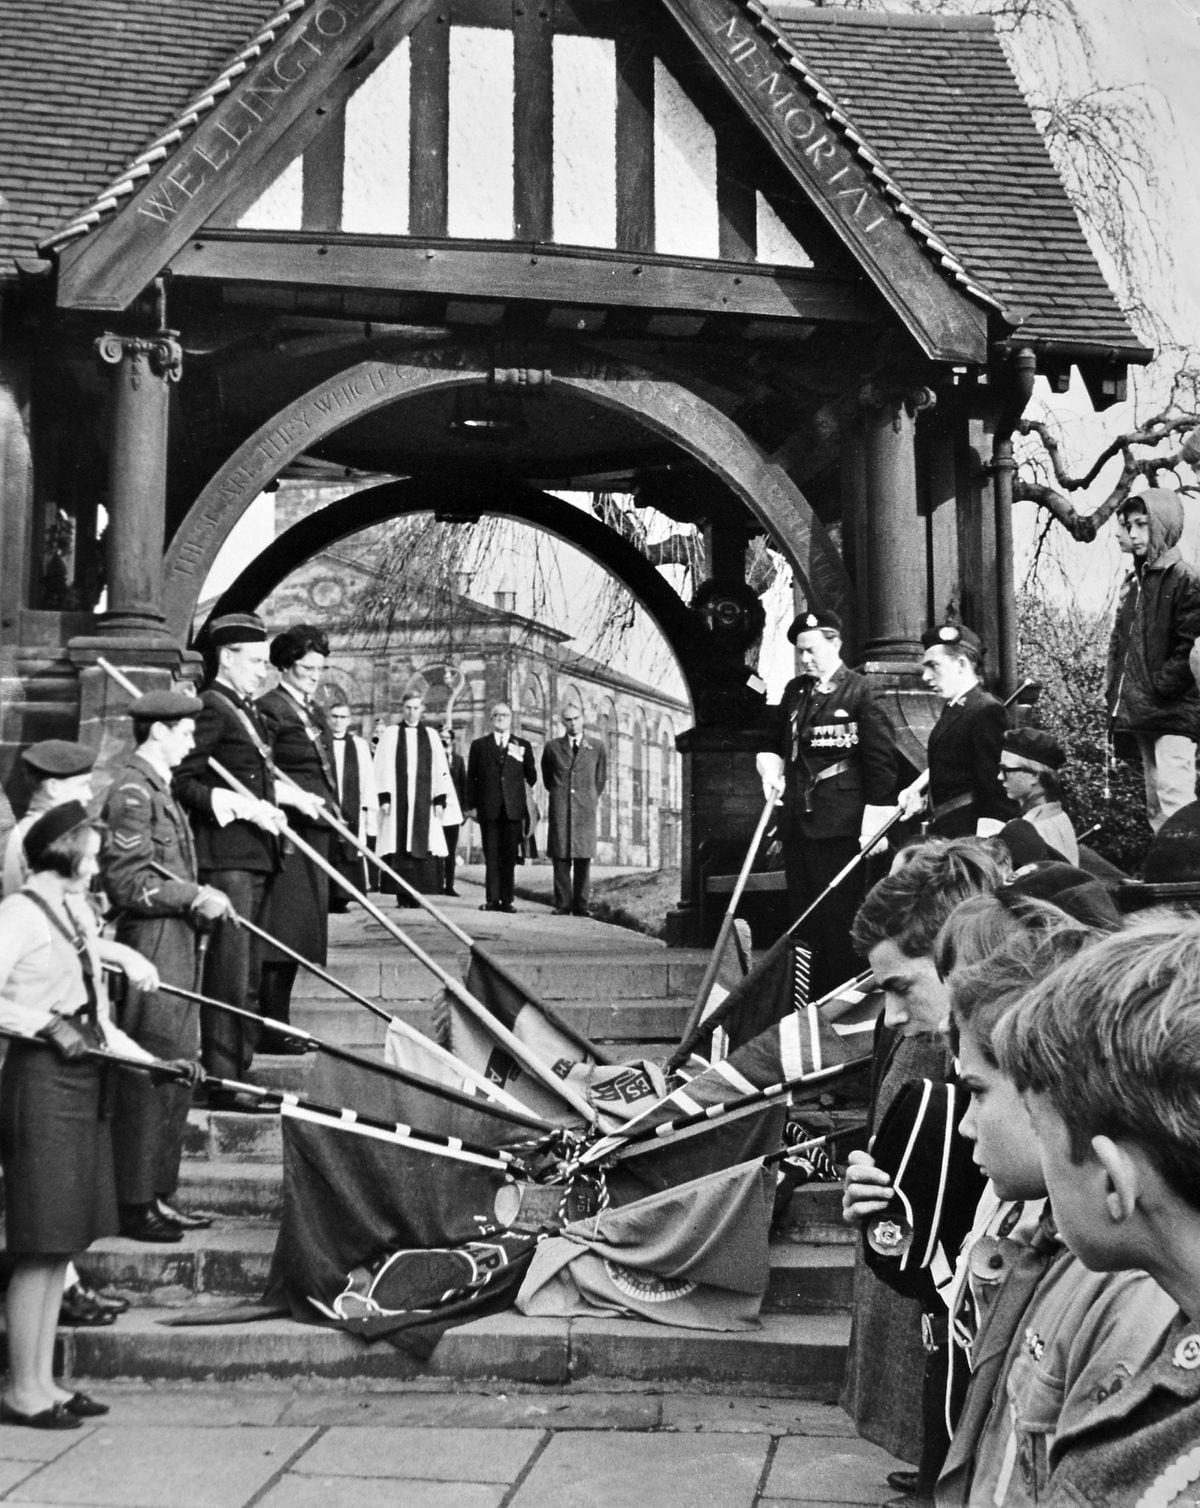 Remembering them... This is Wellington Remembrance Sunday with the standard bearers by the lych gate war memorial at All Saints Church. Our print has no information on when it was taken, but it is perhaps the mid to late 1960s.